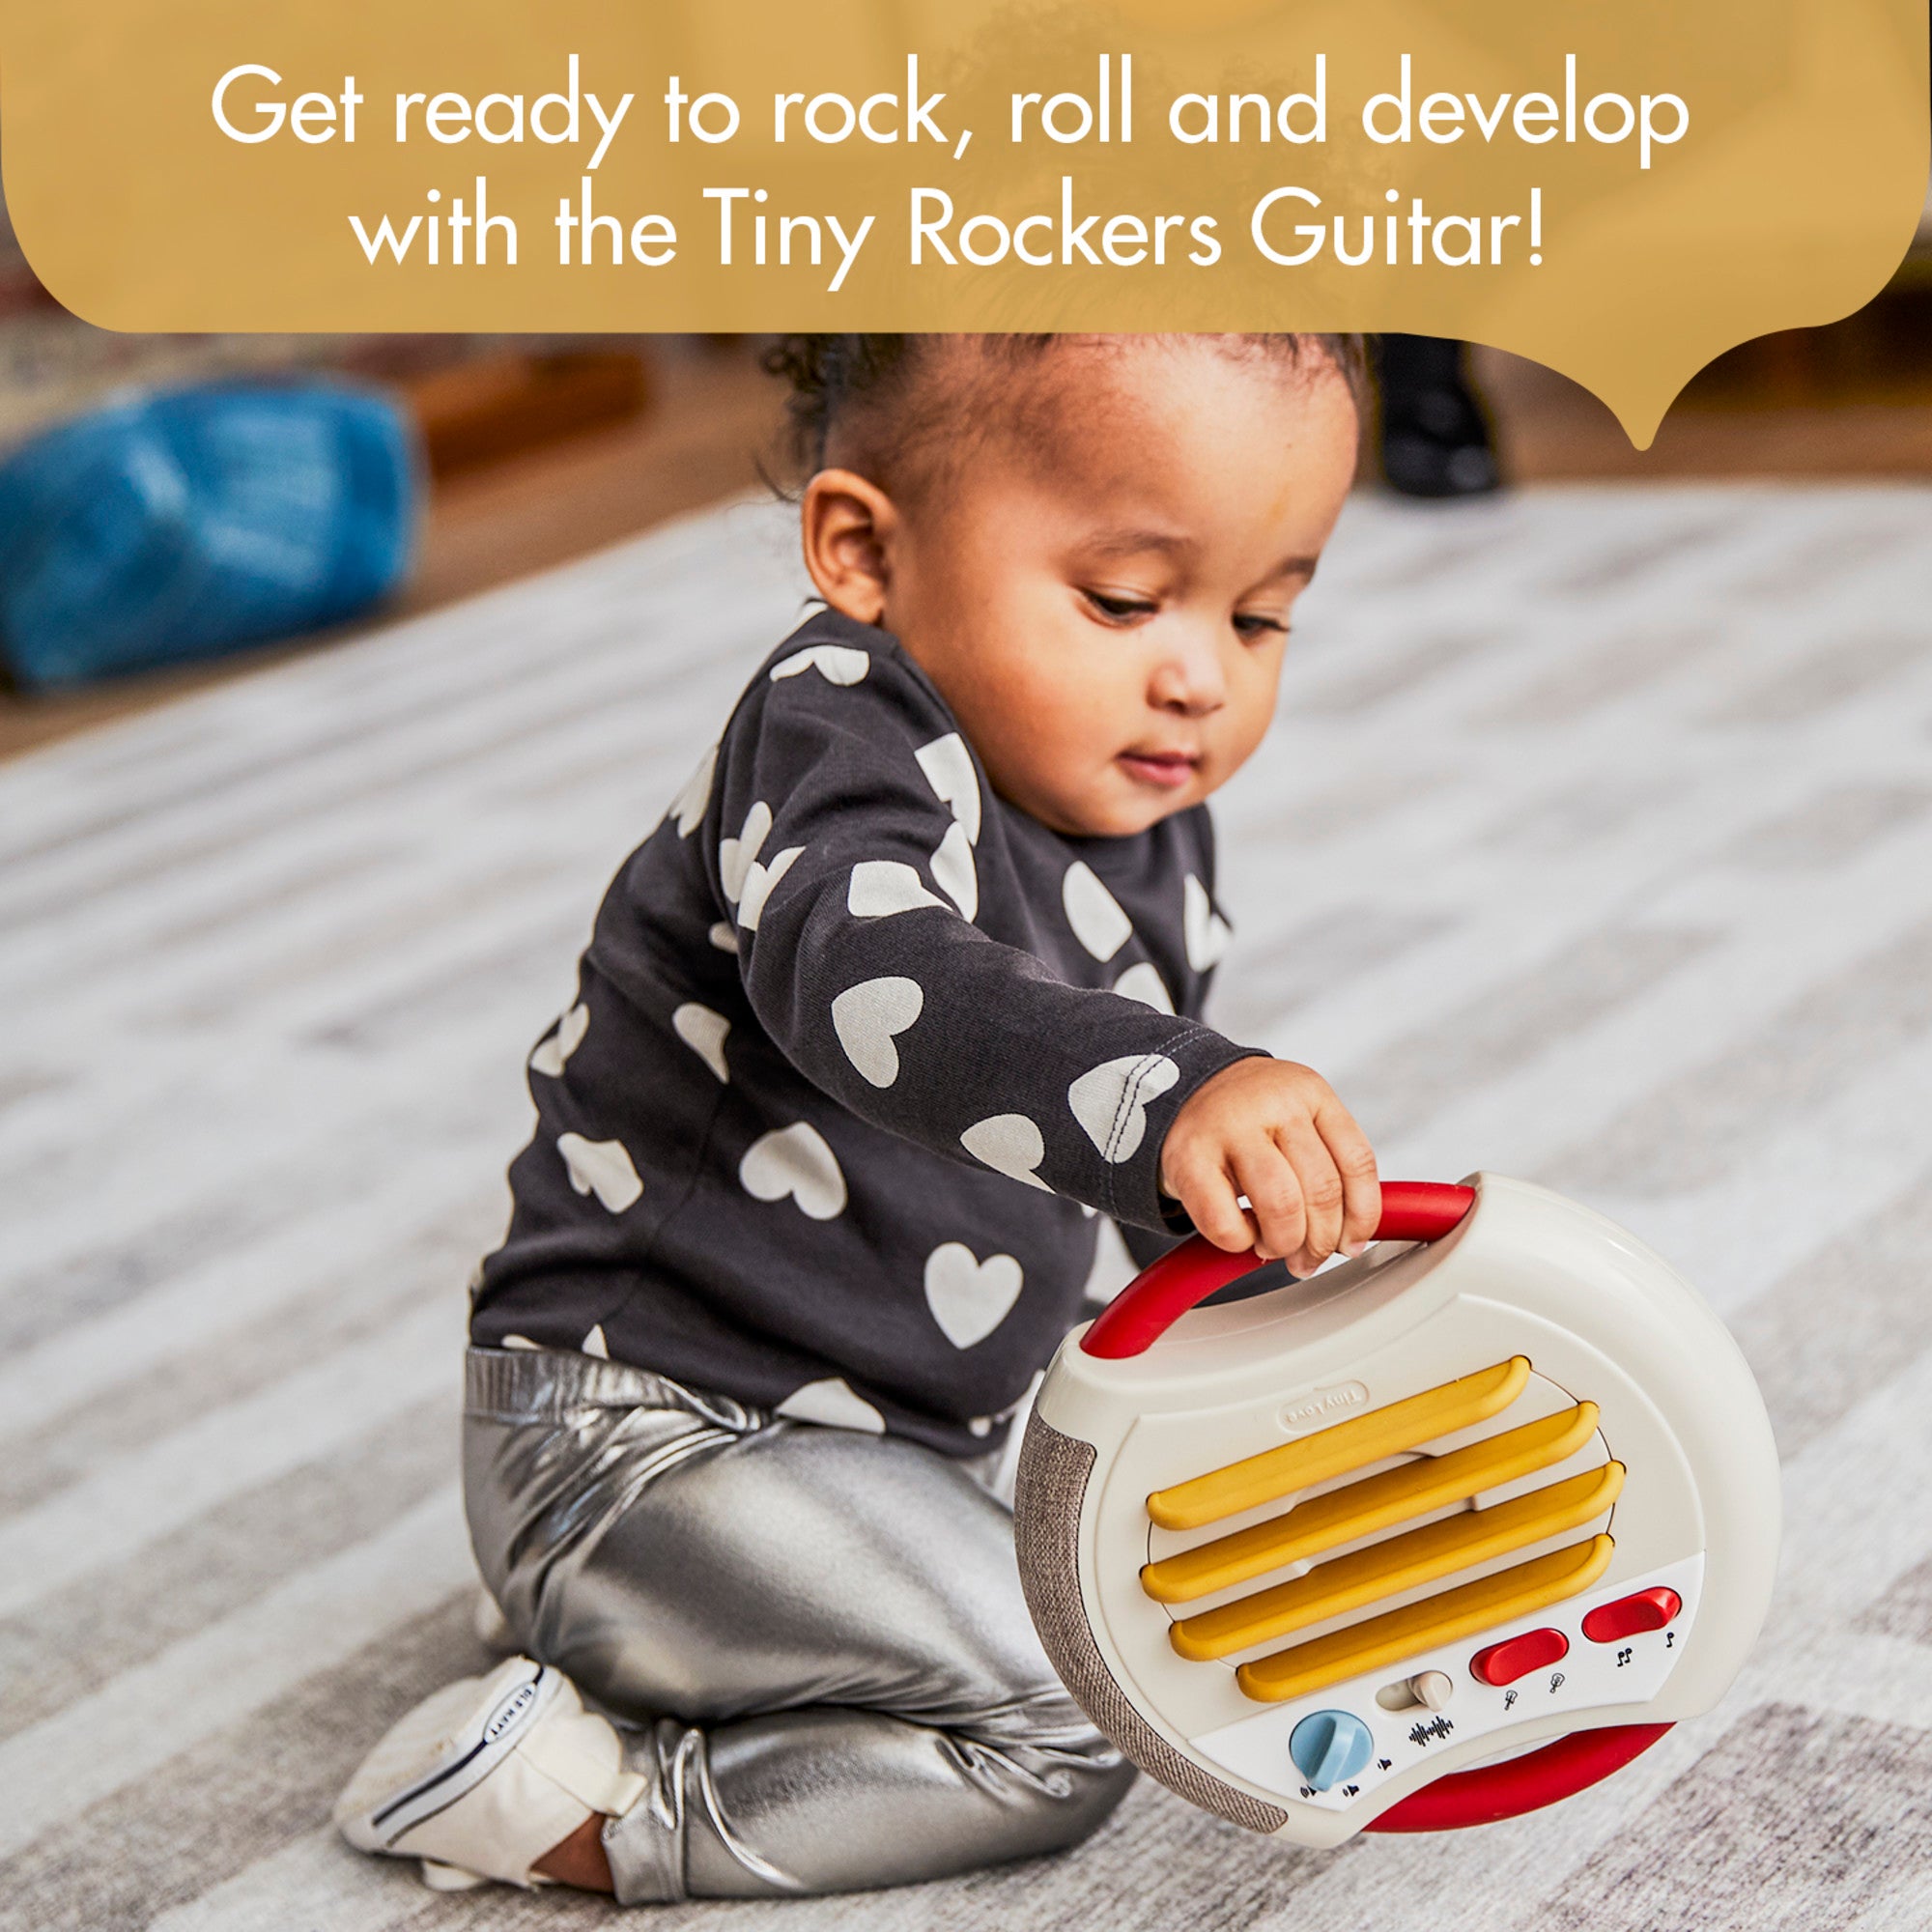 Tiny Rockers Guitar - Making music and having a good time is a wonderful way of bonding with your tiny rockstar!